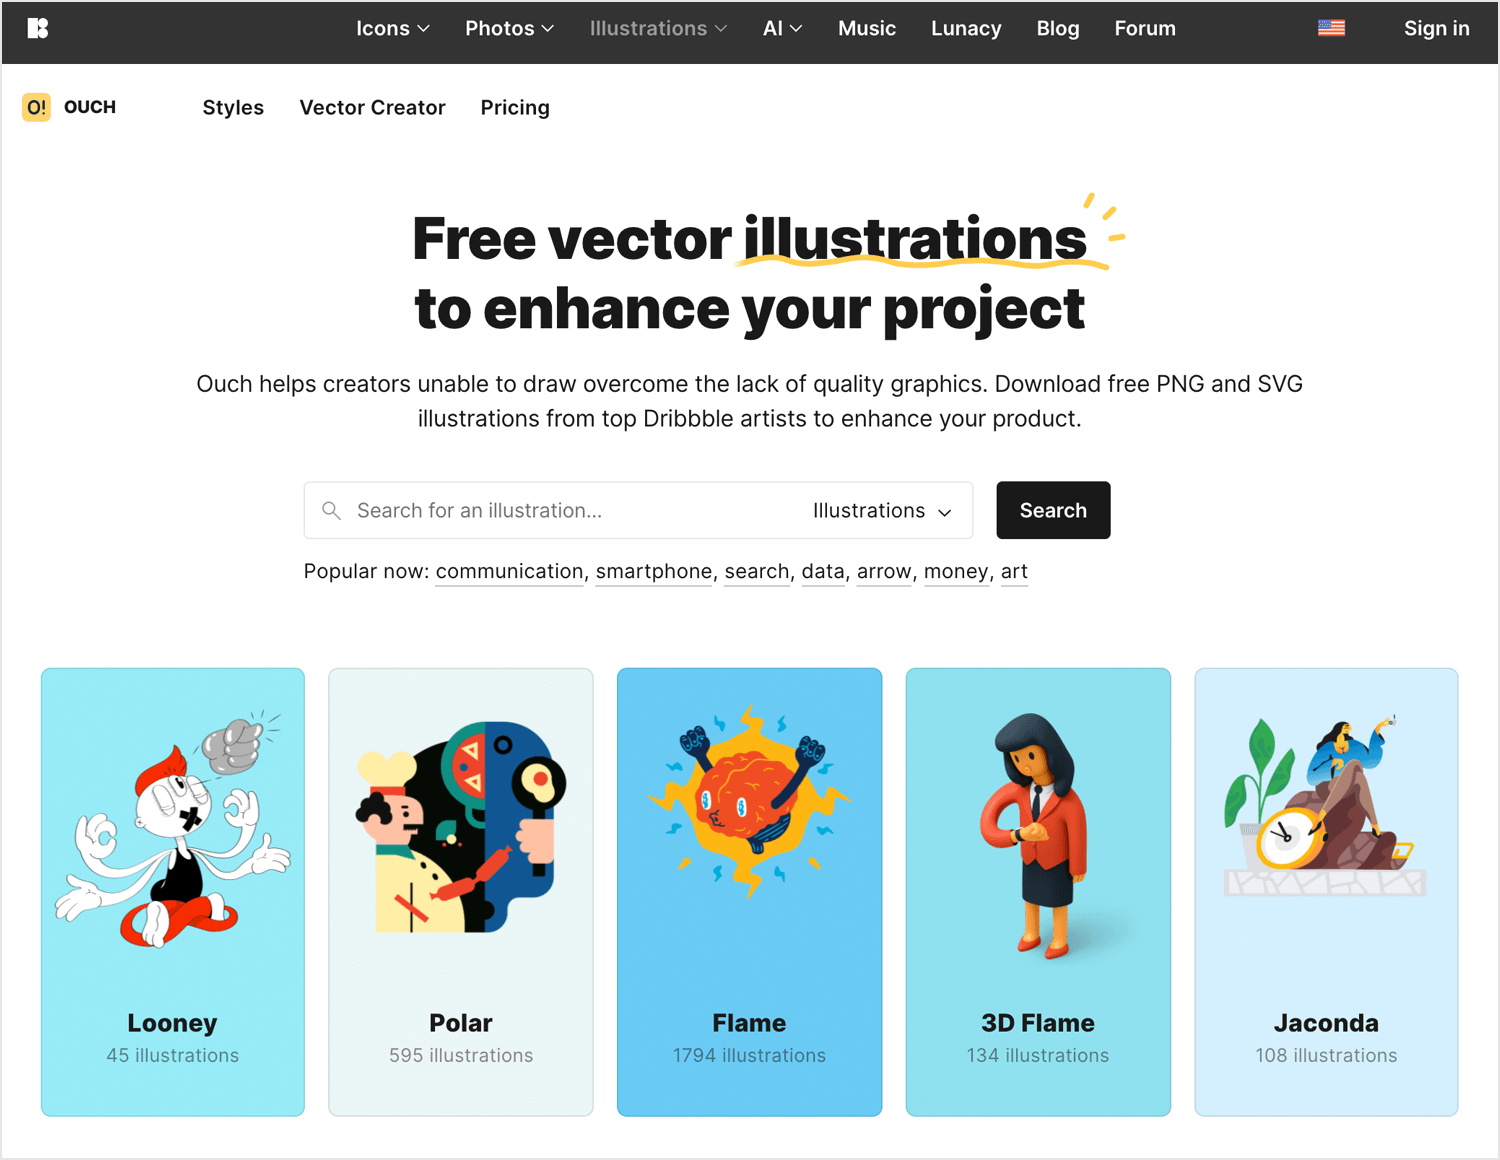 Free vector images from icons8.com